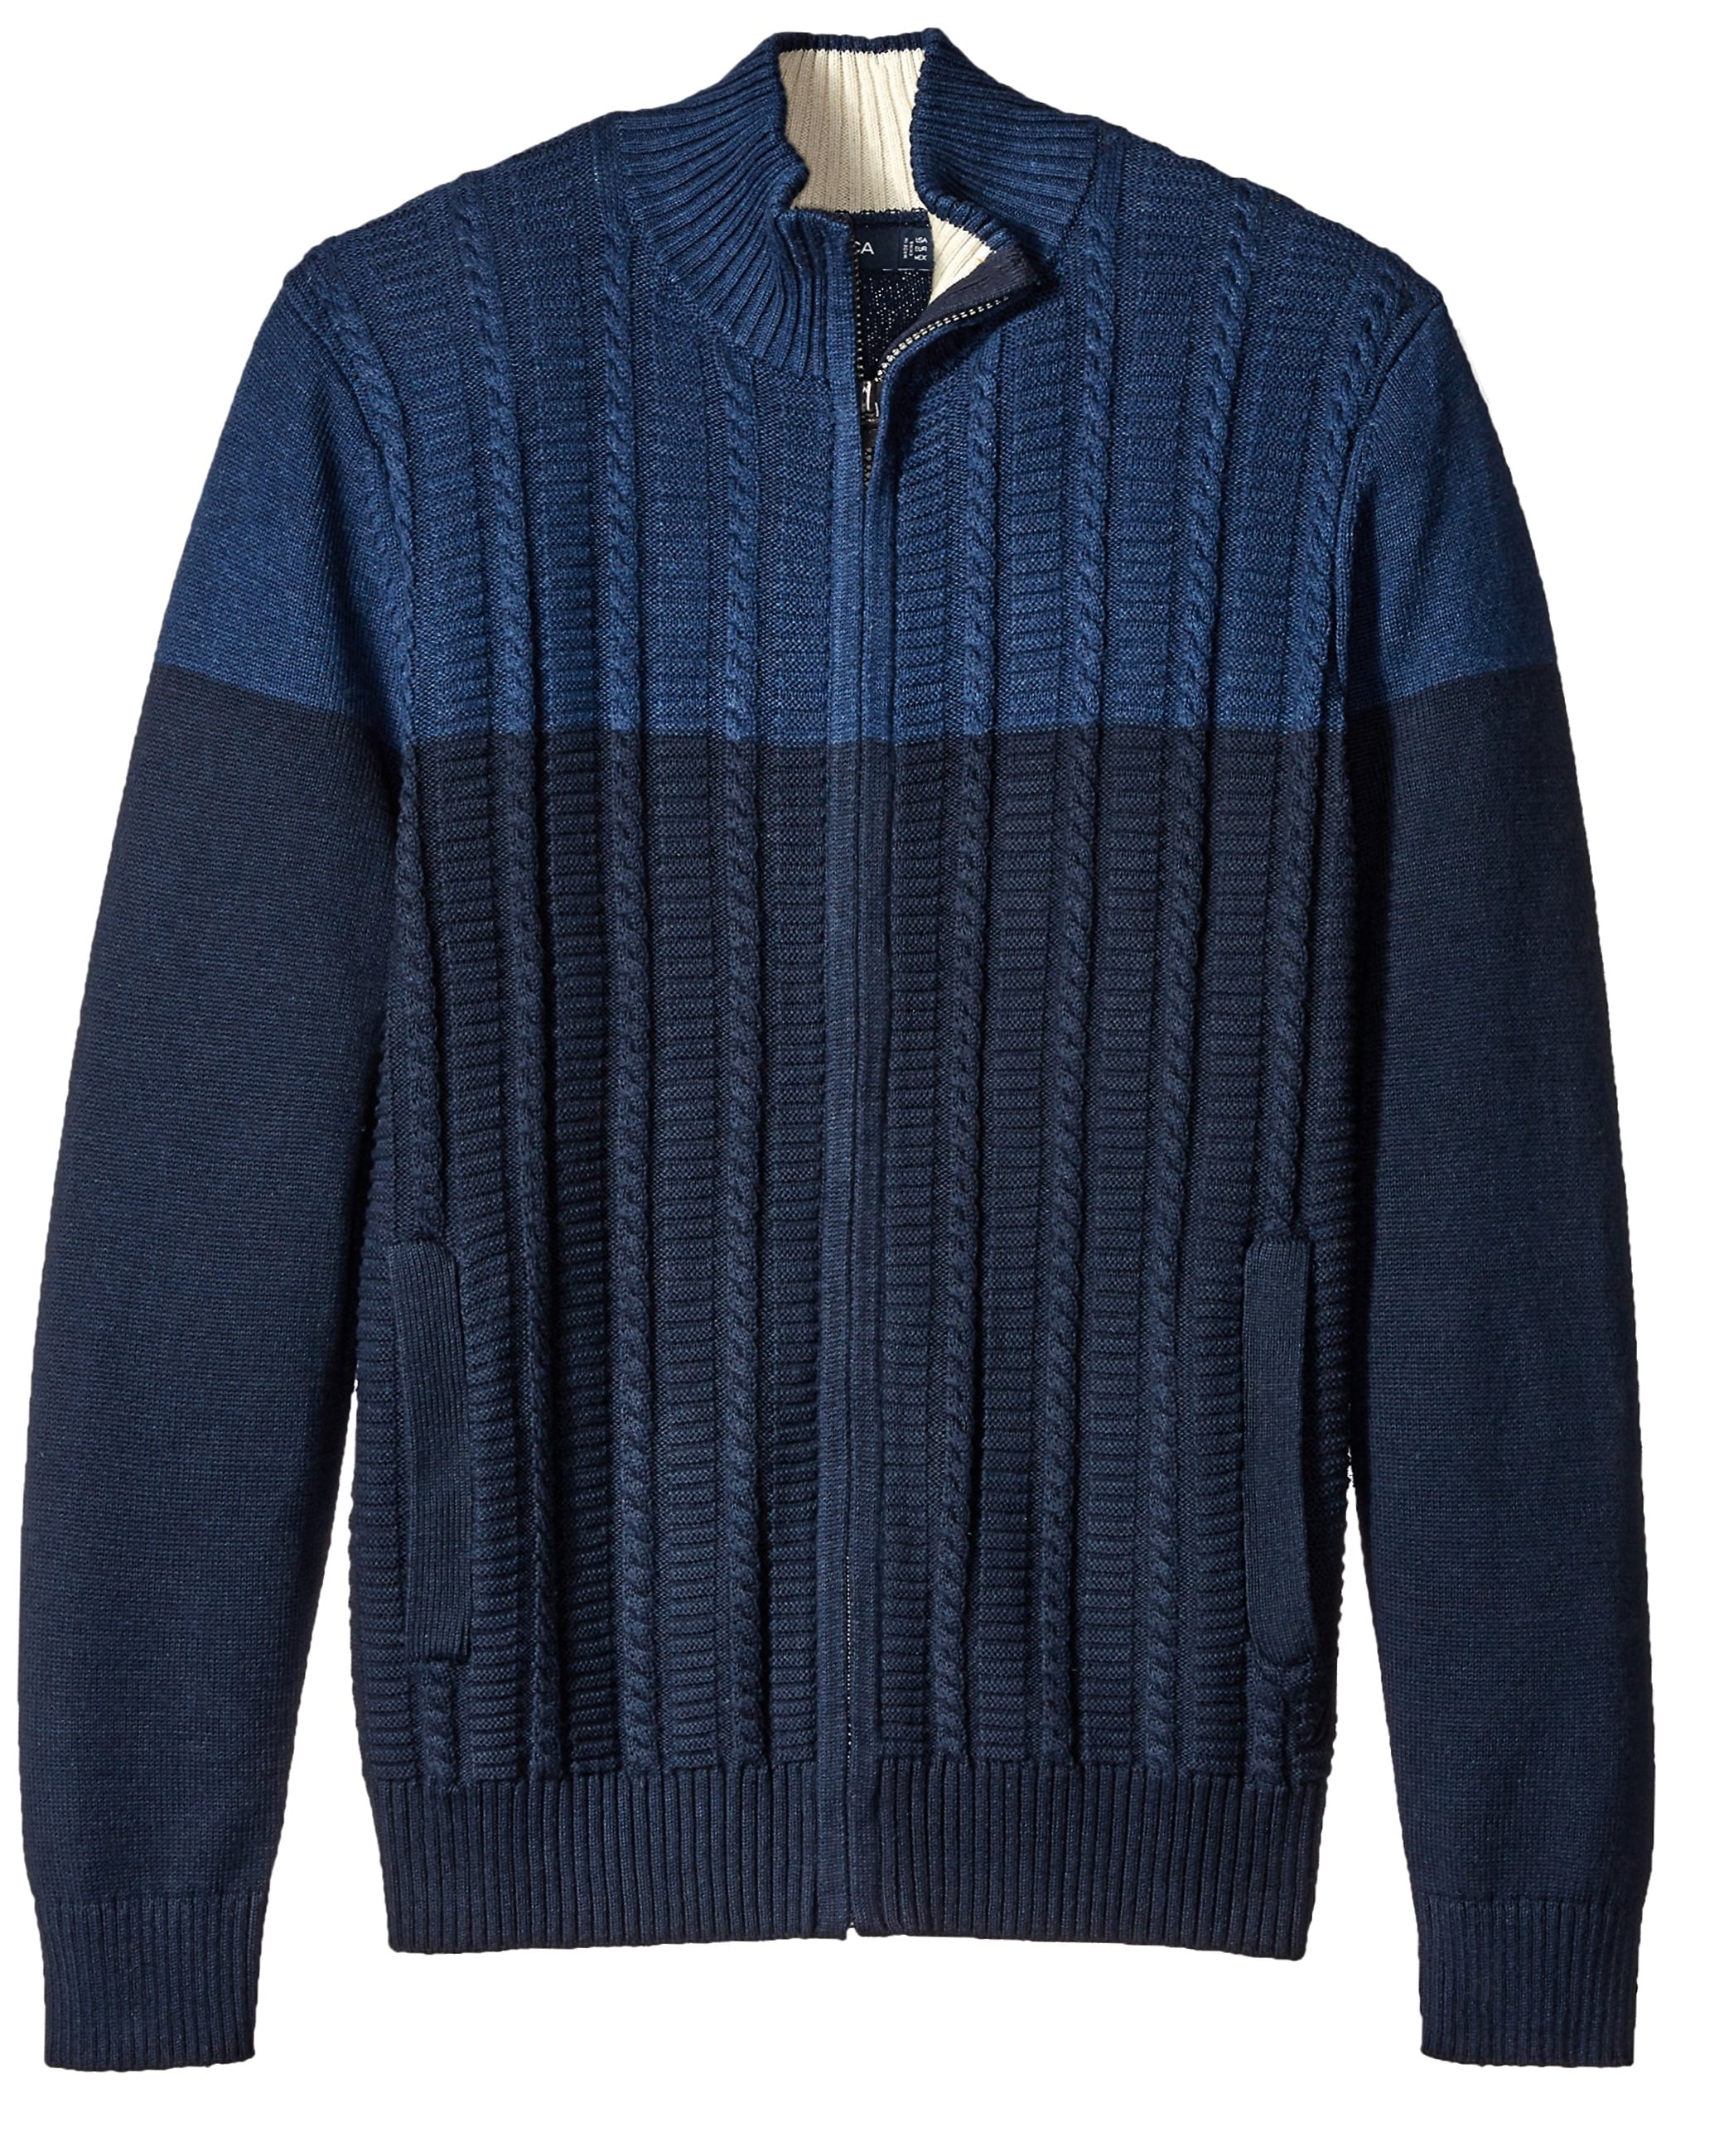 Nautica - Nautica NEW Blue Navy Mens Size Large L Full Zip Cable-Knit ...